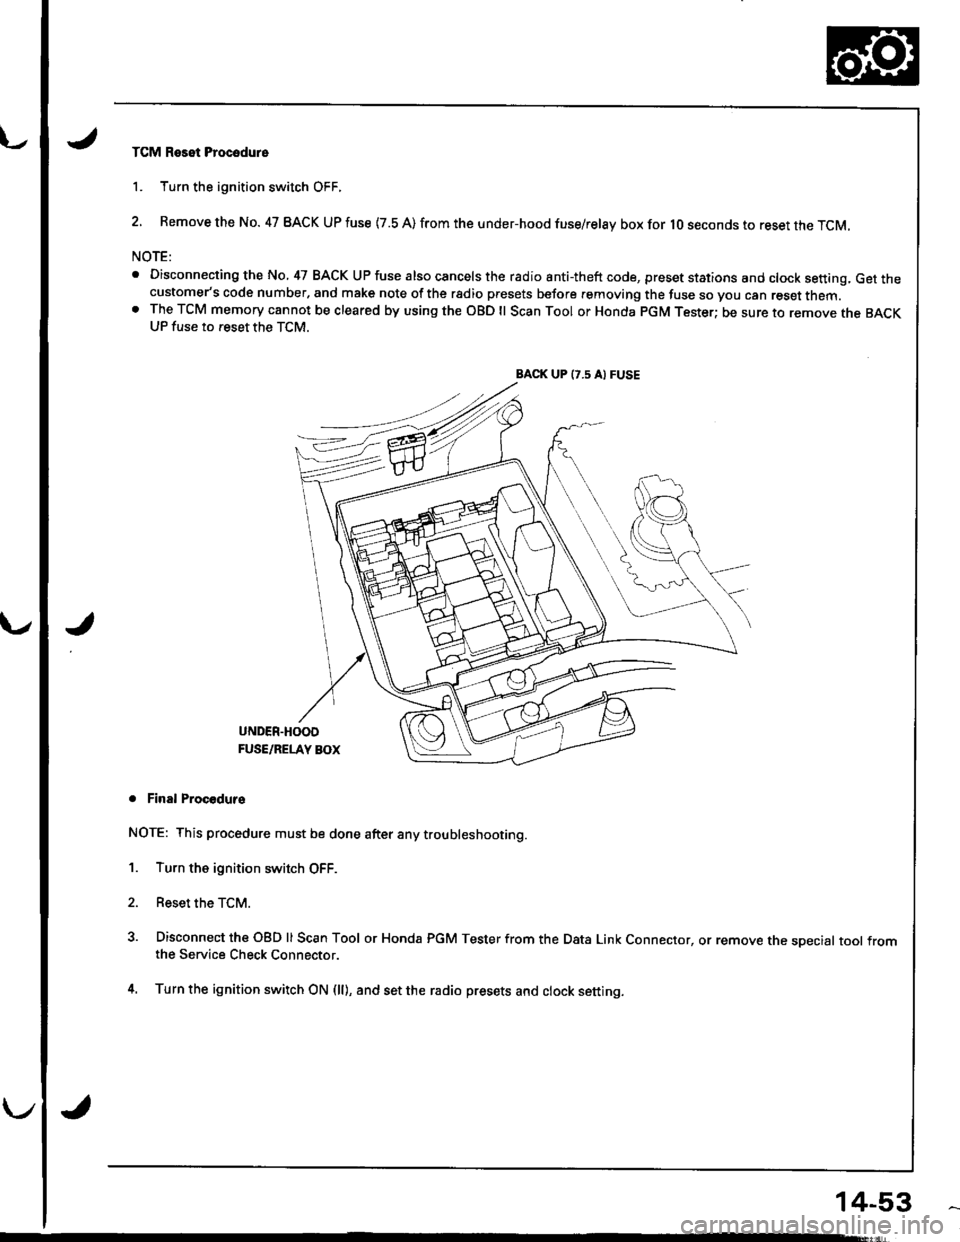 HONDA INTEGRA 1998 4.G Workshop Manual TCM Reset Procodure
1. Turn the ignition switch OFF.
2. Remove the No. 47 BACK UP fuse {7.8 A) from the under-hood fuse/relay box for lO seconds to reset the TCM.
NOTE:
. Disconnecting the No, 47 BACK